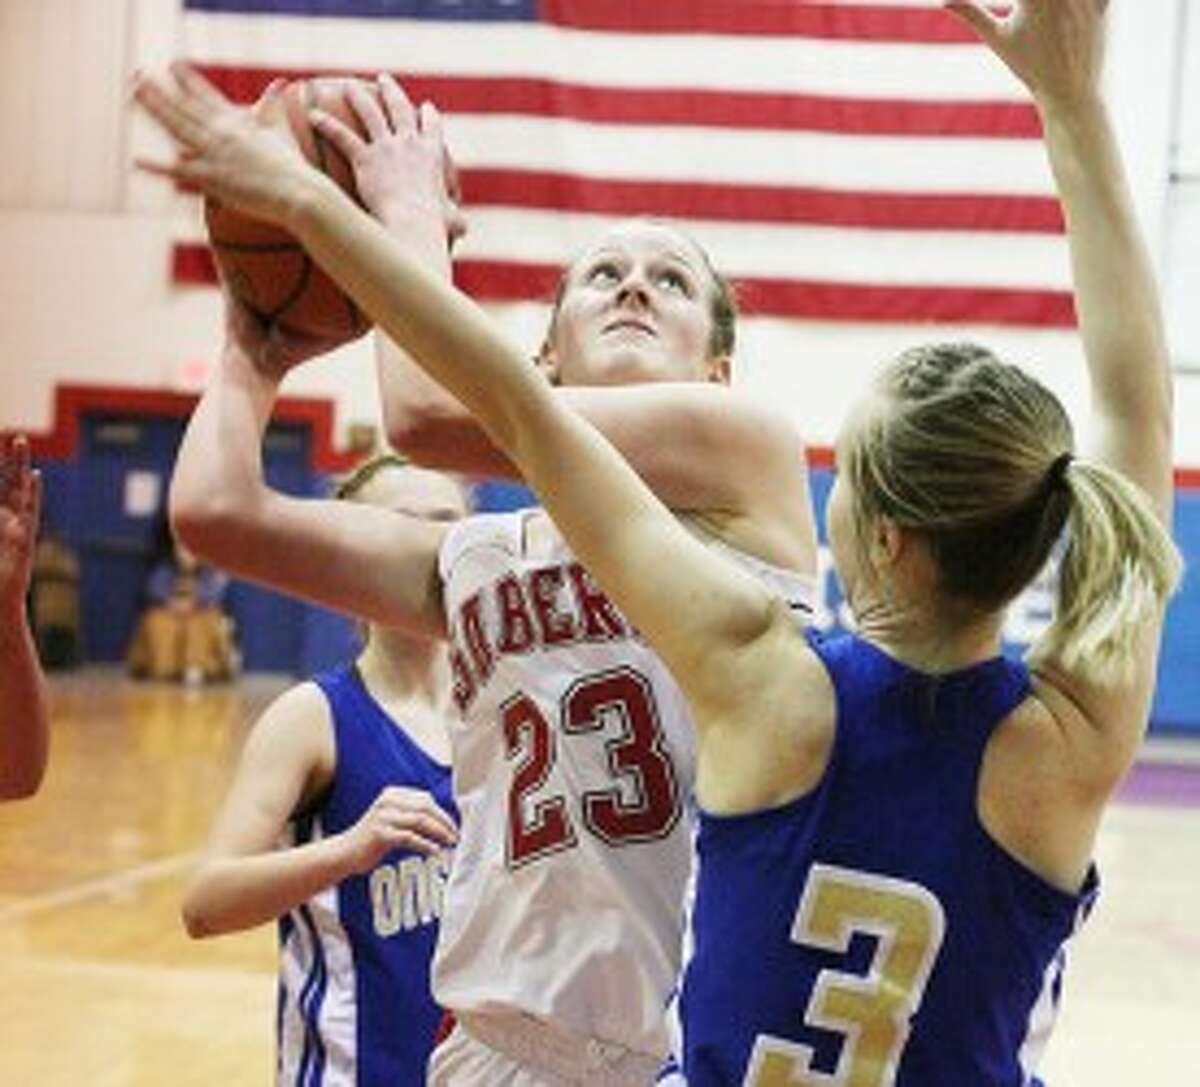 Manistee Catholic Central’s Haley Doyle (23) shoots over Onekama’s Kelly Koon during Thursday’s game. (Dylan Savela/News Advocate)